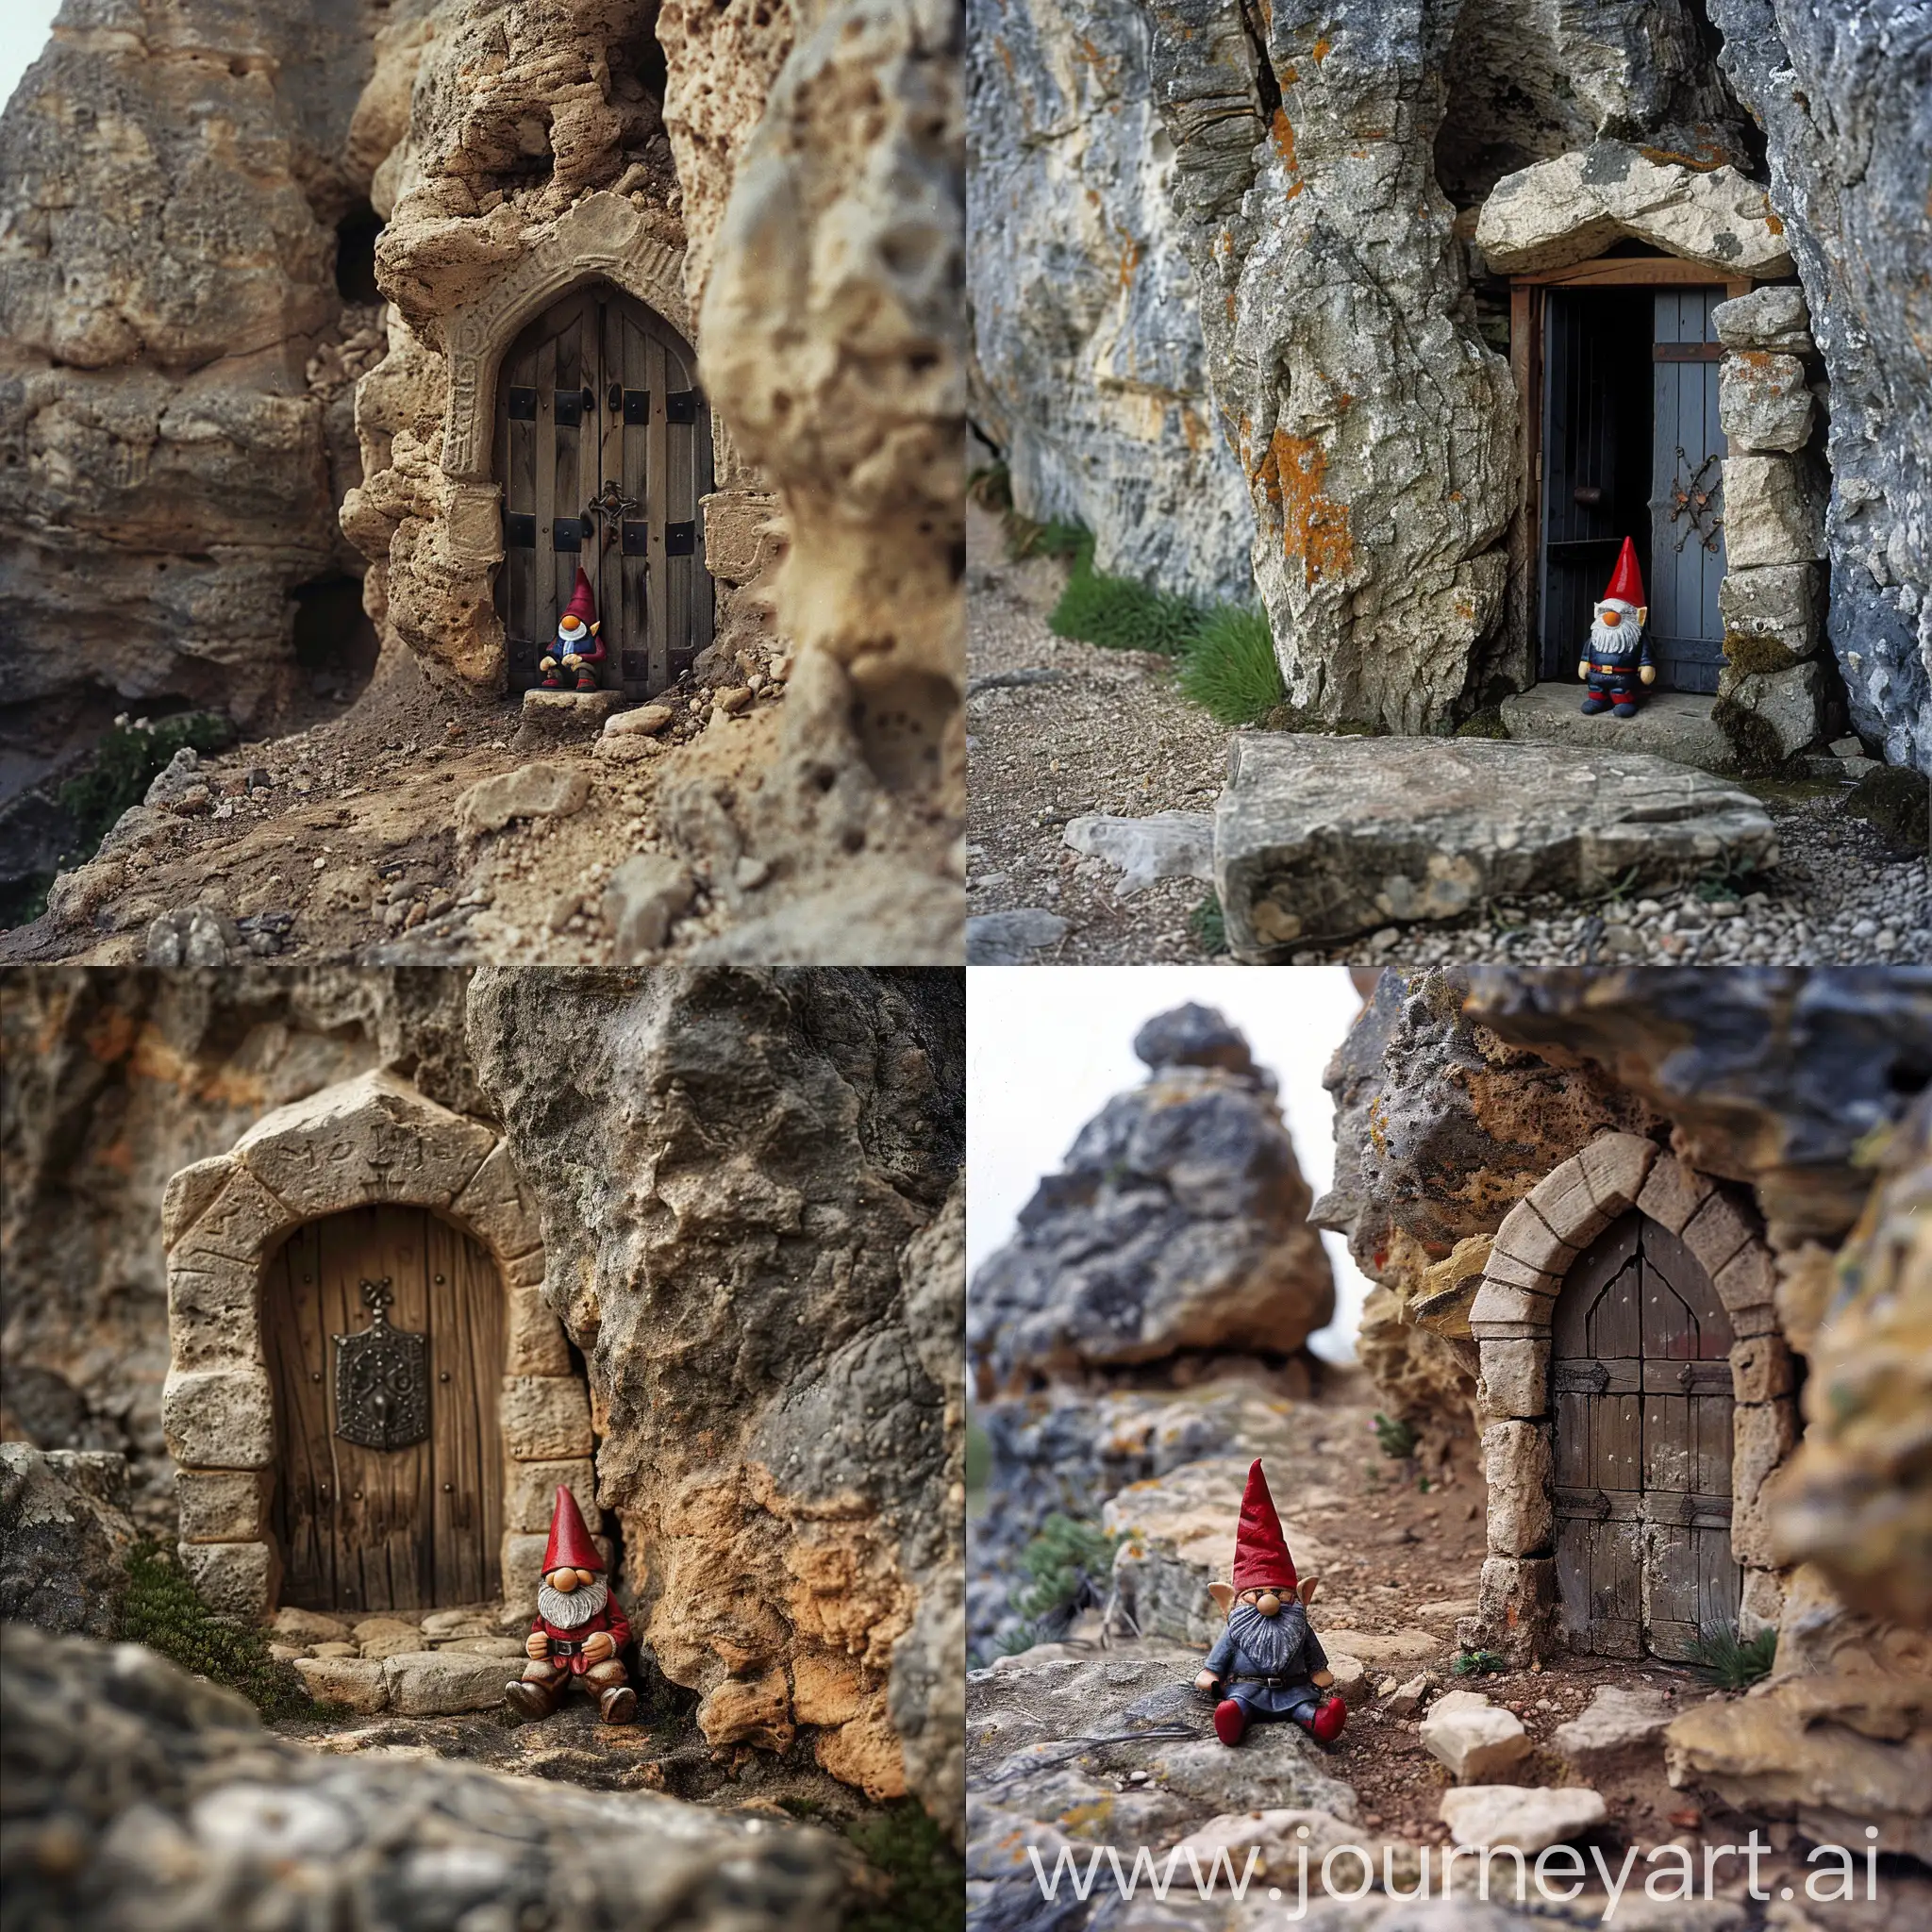 A medeival,door in a rockformation, a gnome sitting in front to the door